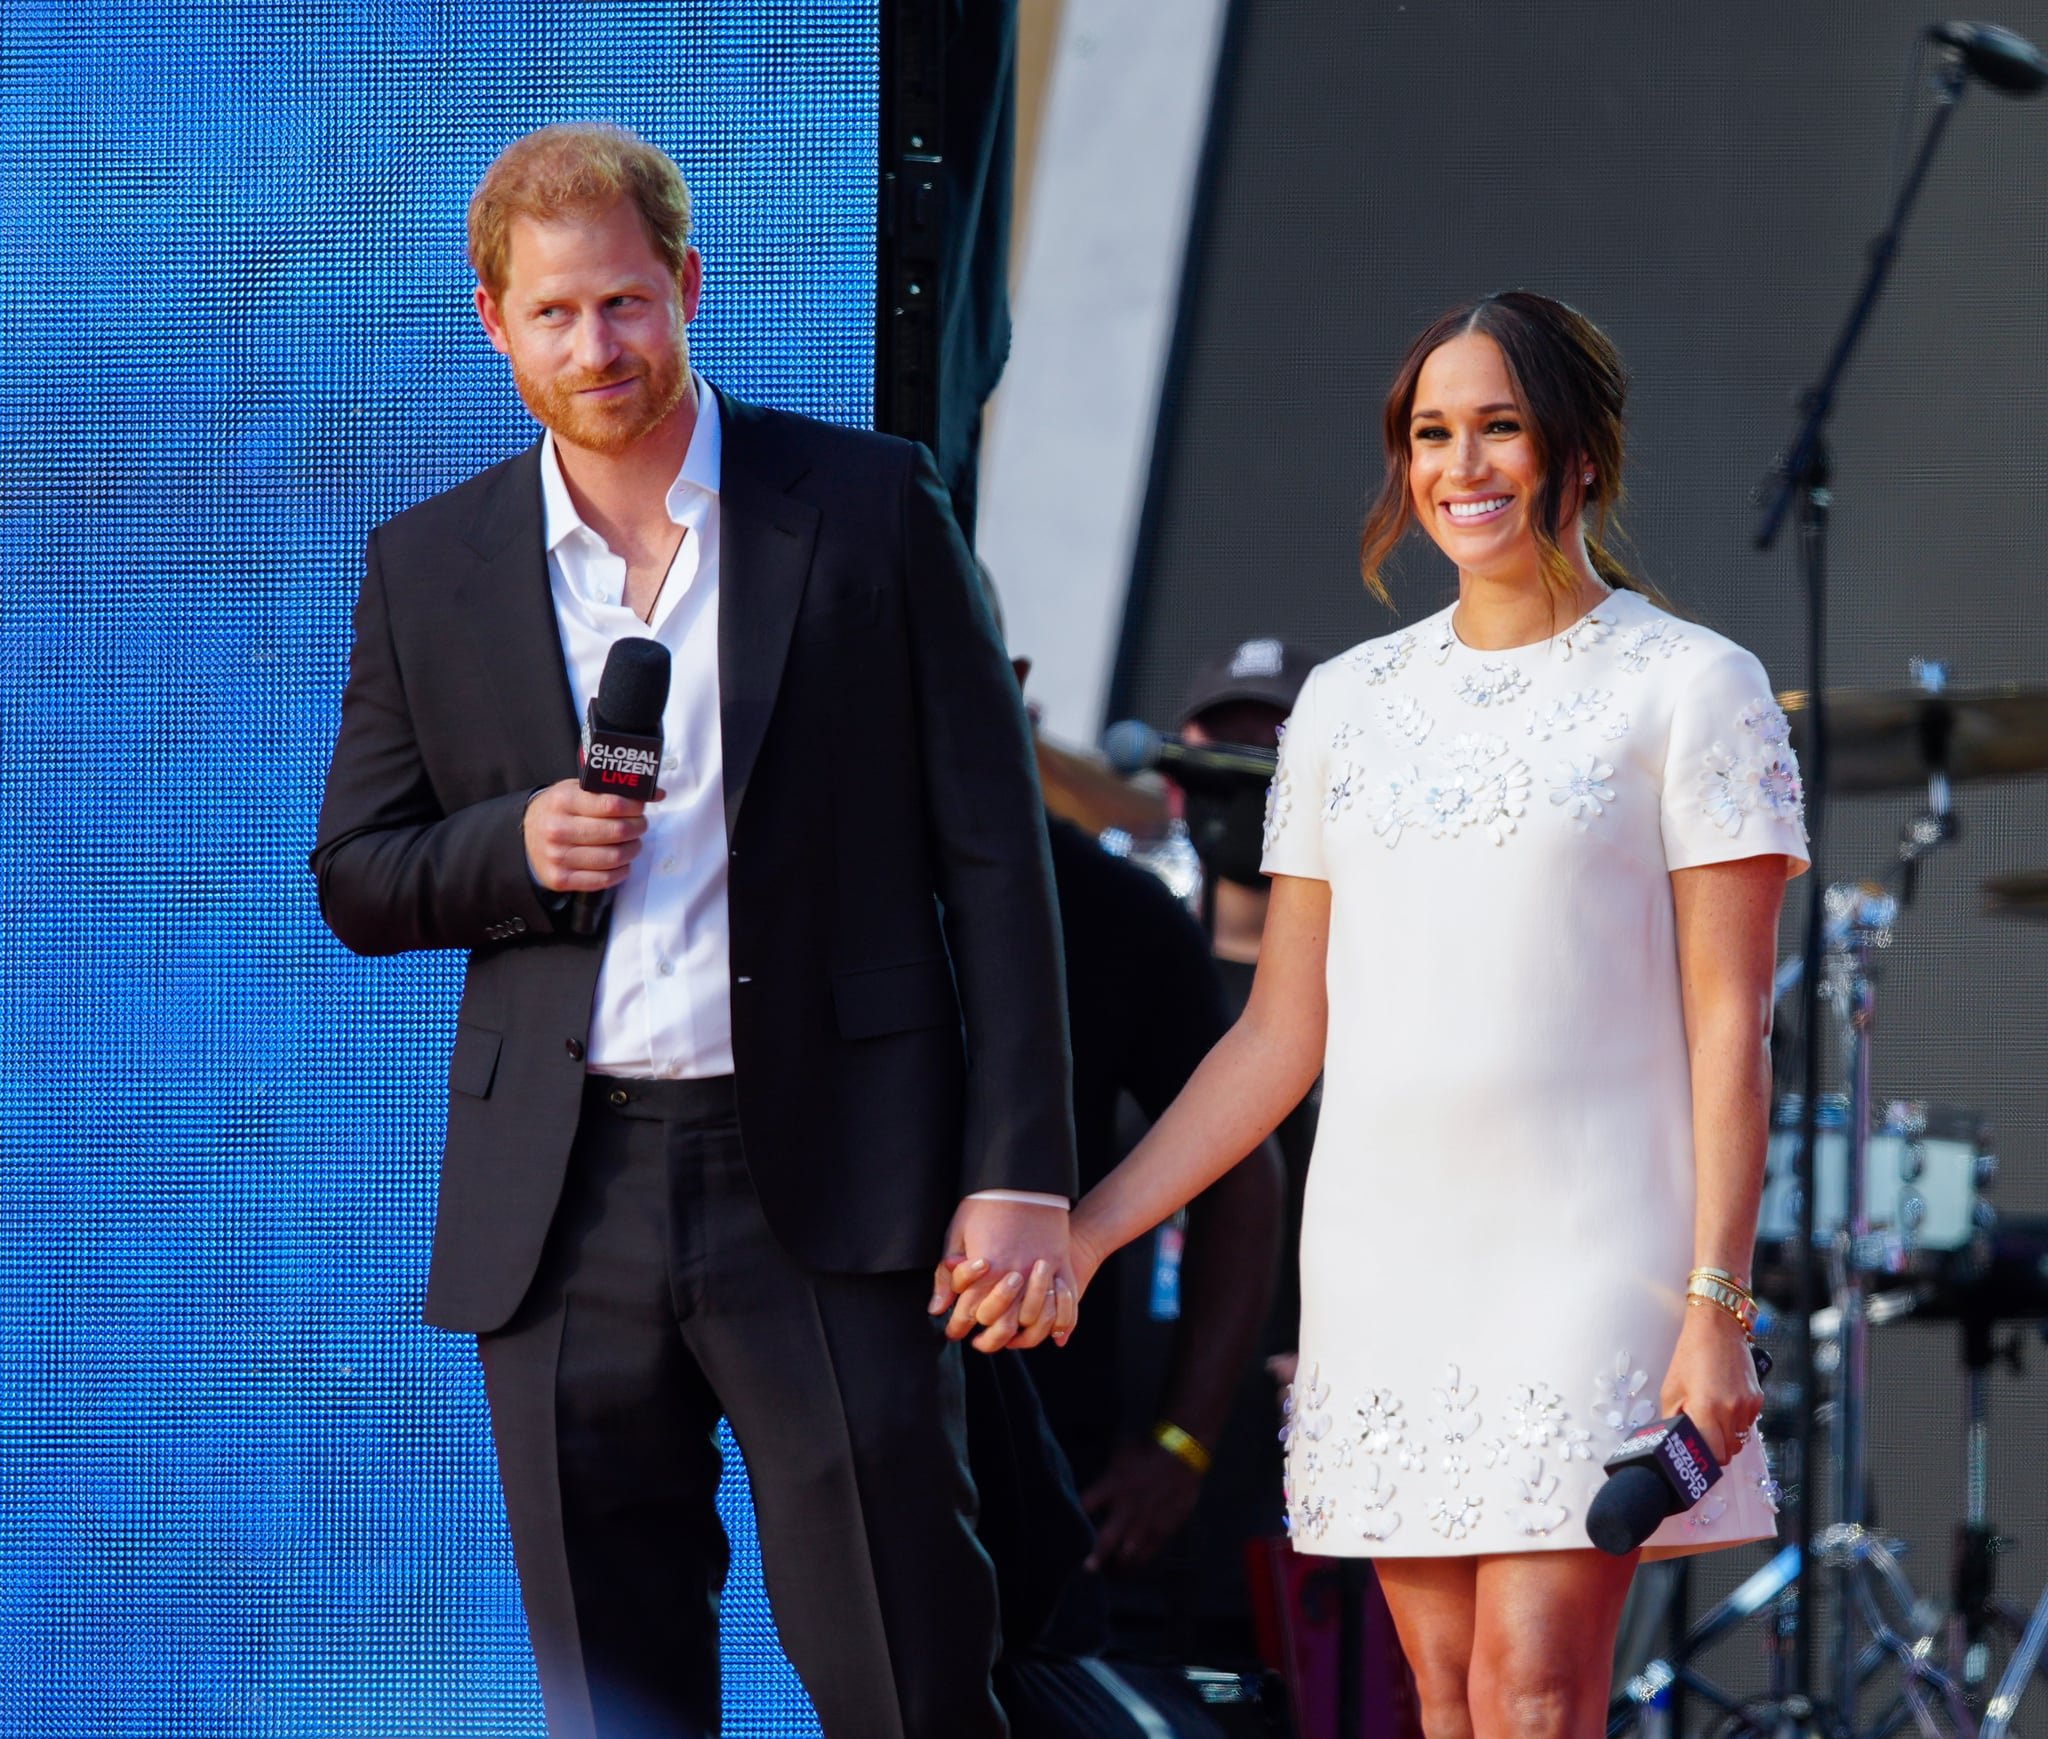 NEW YORK, NEW YORK - SEPTEMBER 25: Prince Harry and Meghan Markle speak onstage at Global Citizen Live: New York on September 25, 2021 in New York City.  (Photo by Gotham/WireImage)